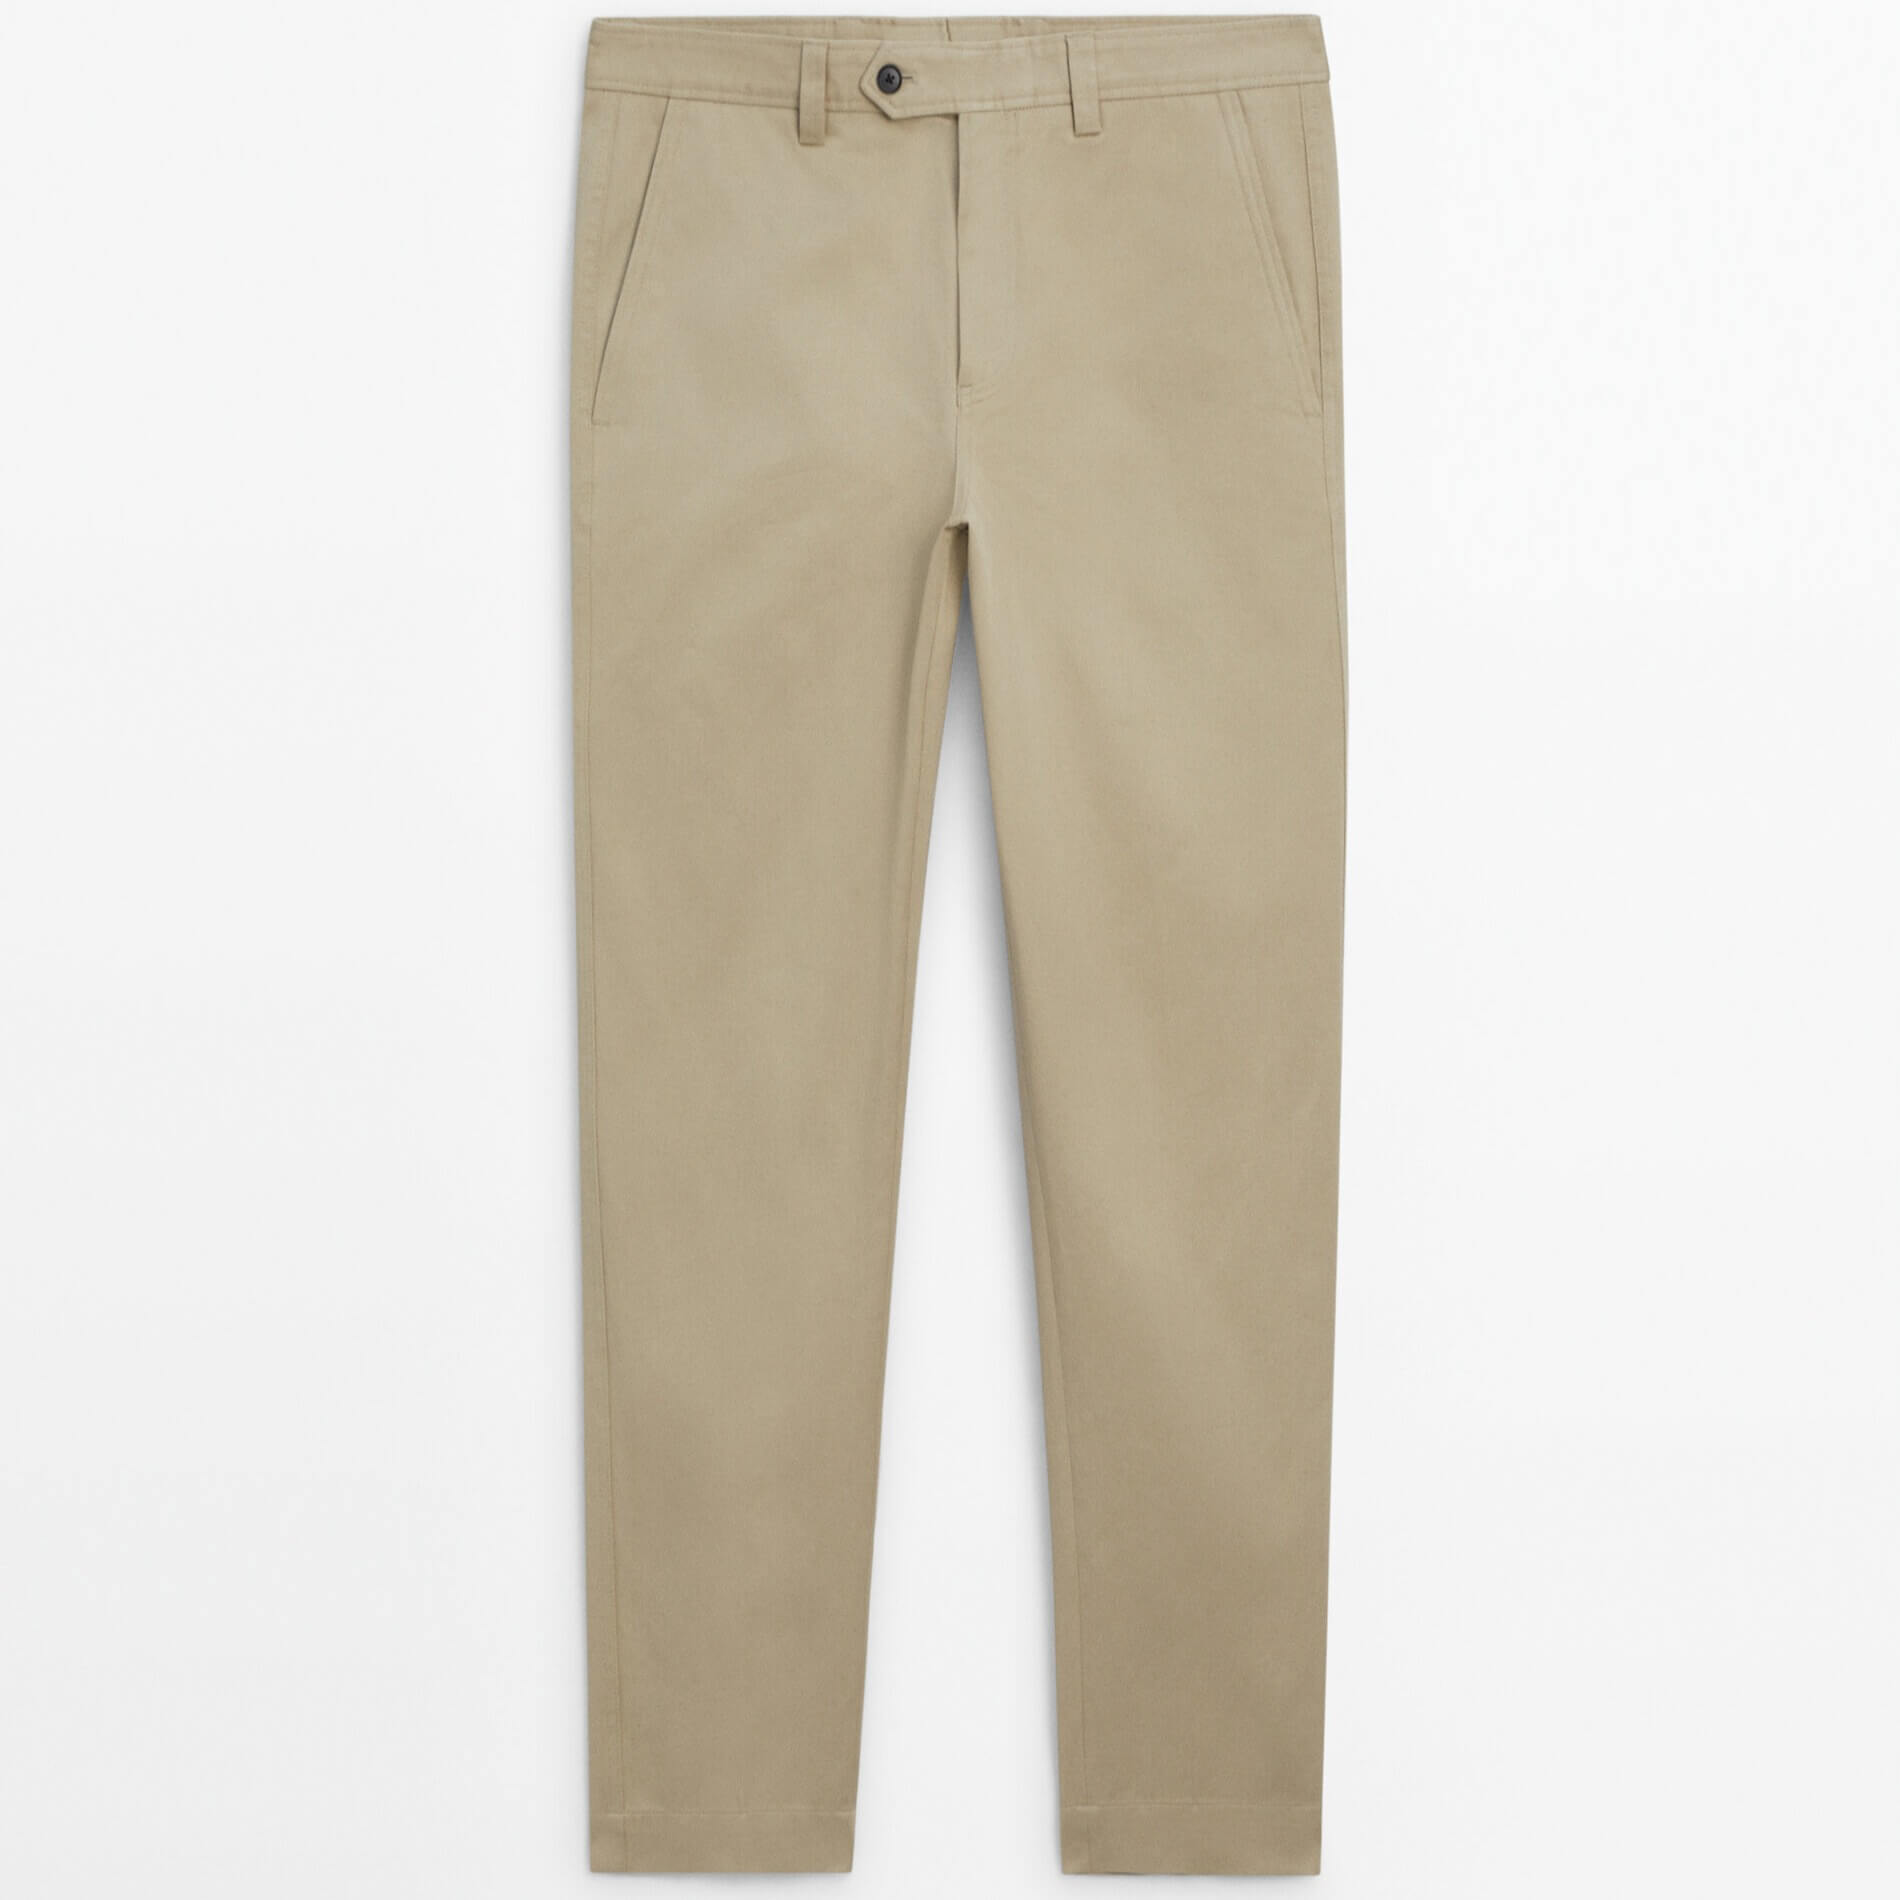 Брюки Massimo Dutti Relaxed Fit Belted Chino, бежевый